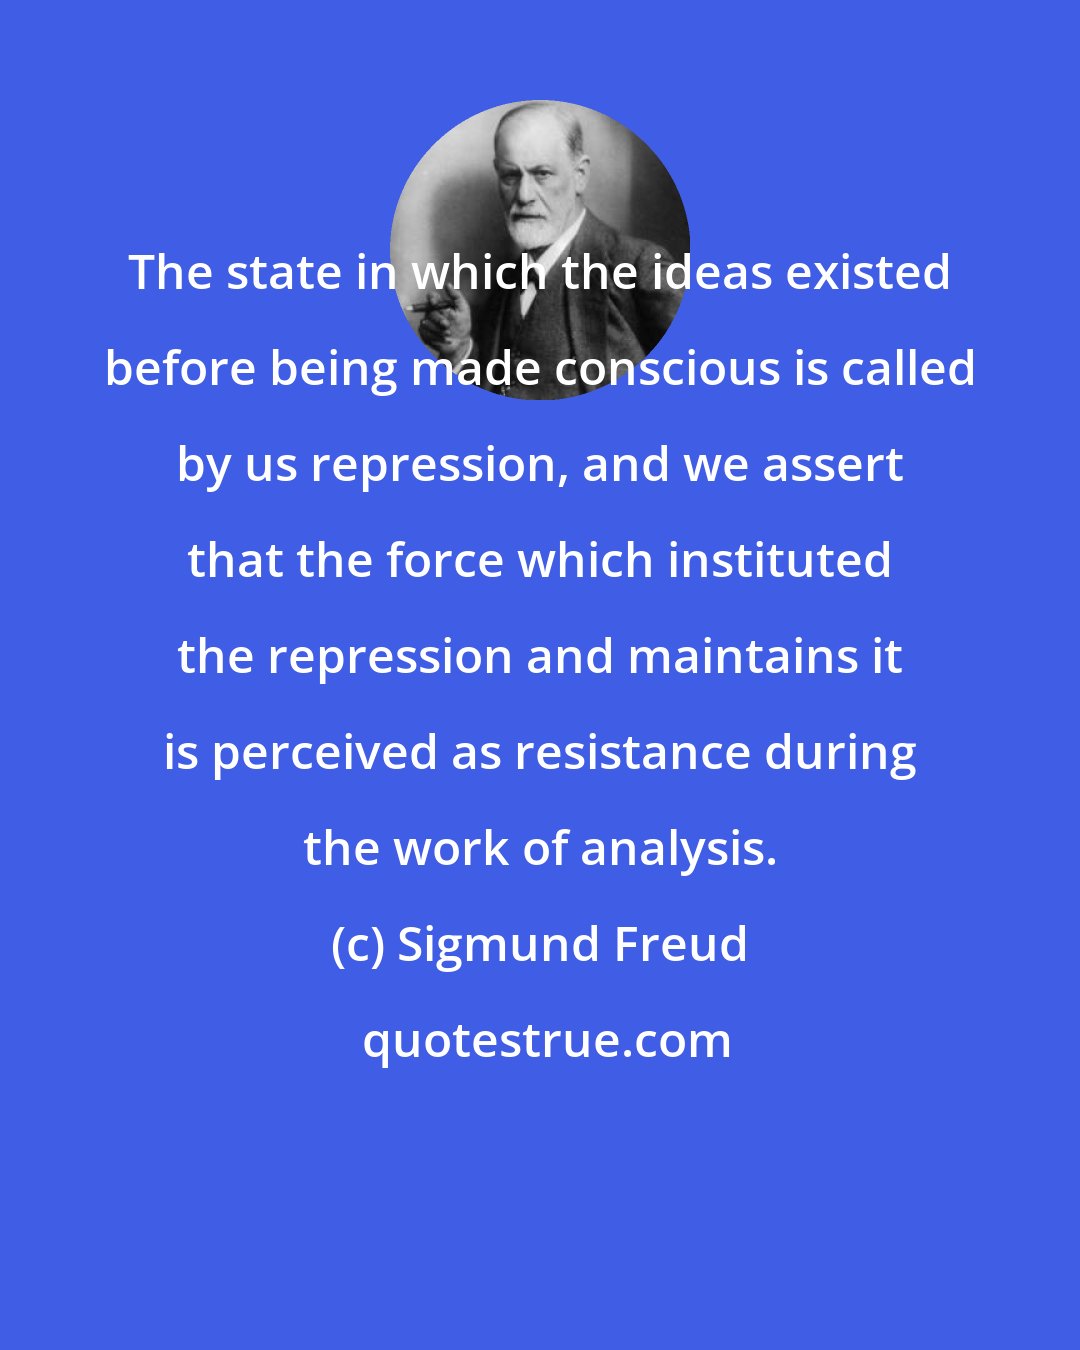 Sigmund Freud: The state in which the ideas existed before being made conscious is called by us repression, and we assert that the force which instituted the repression and maintains it is perceived as resistance during the work of analysis.